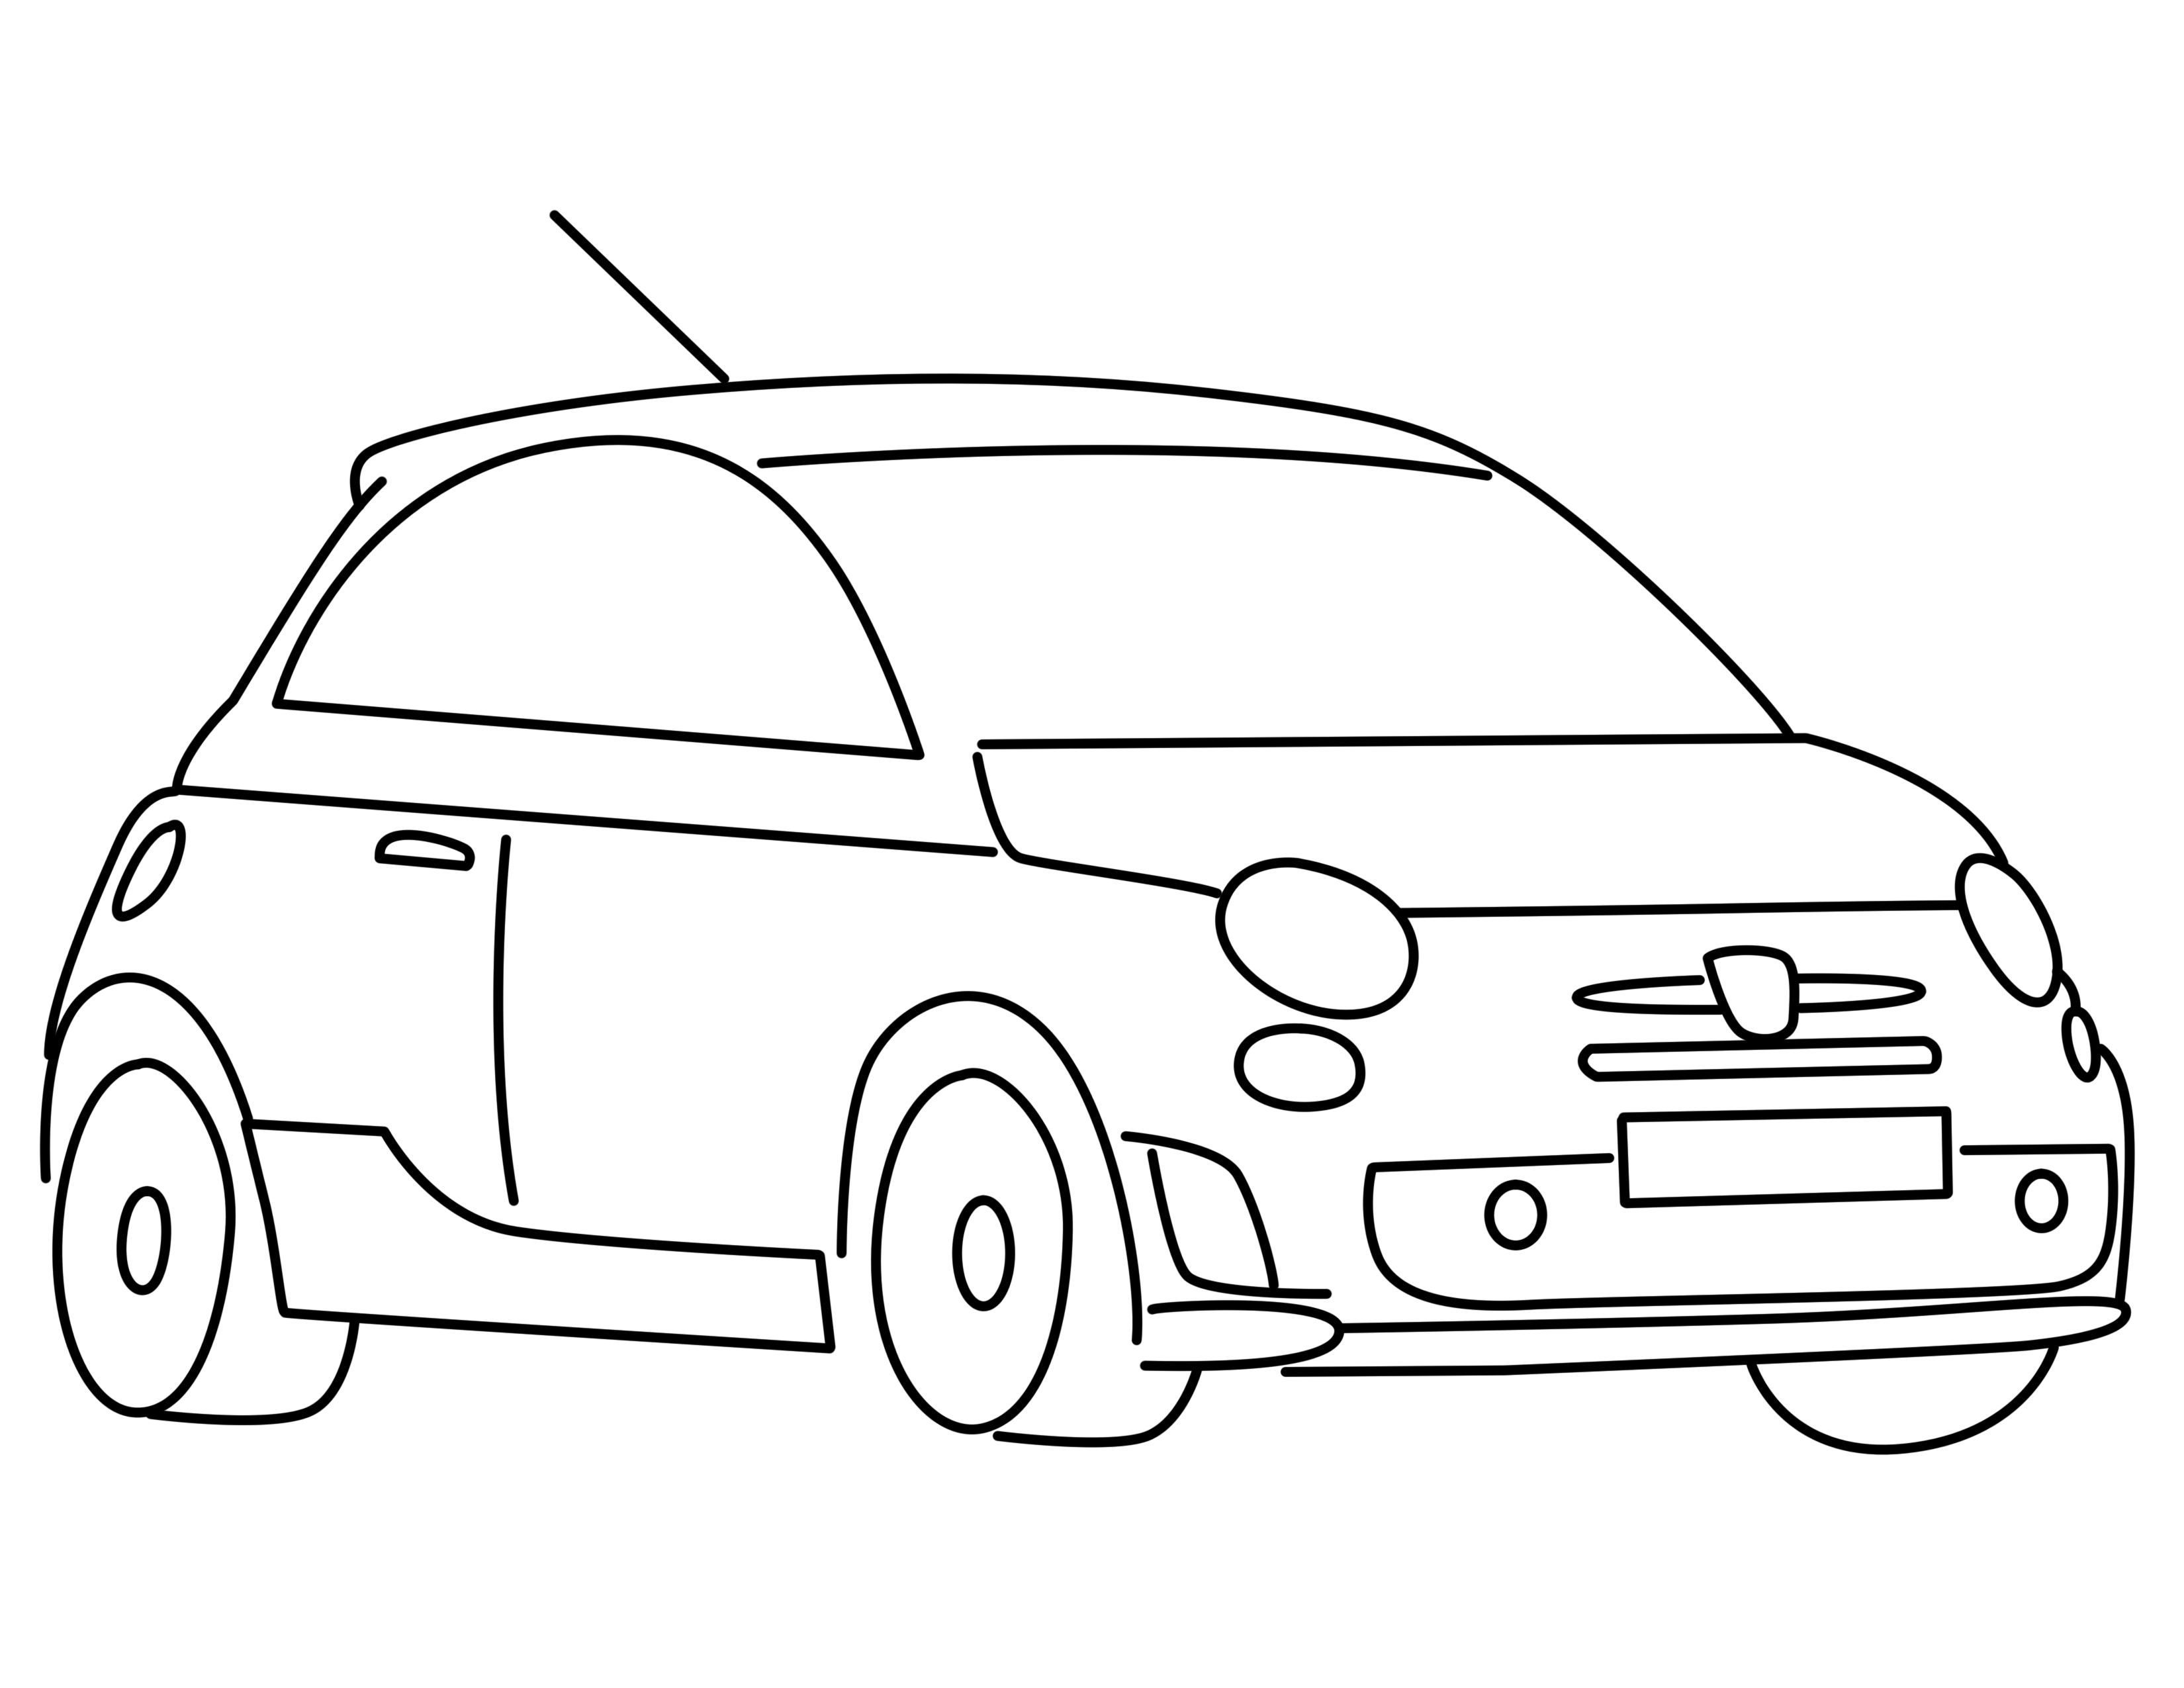 draw Abarth 500 coloring page